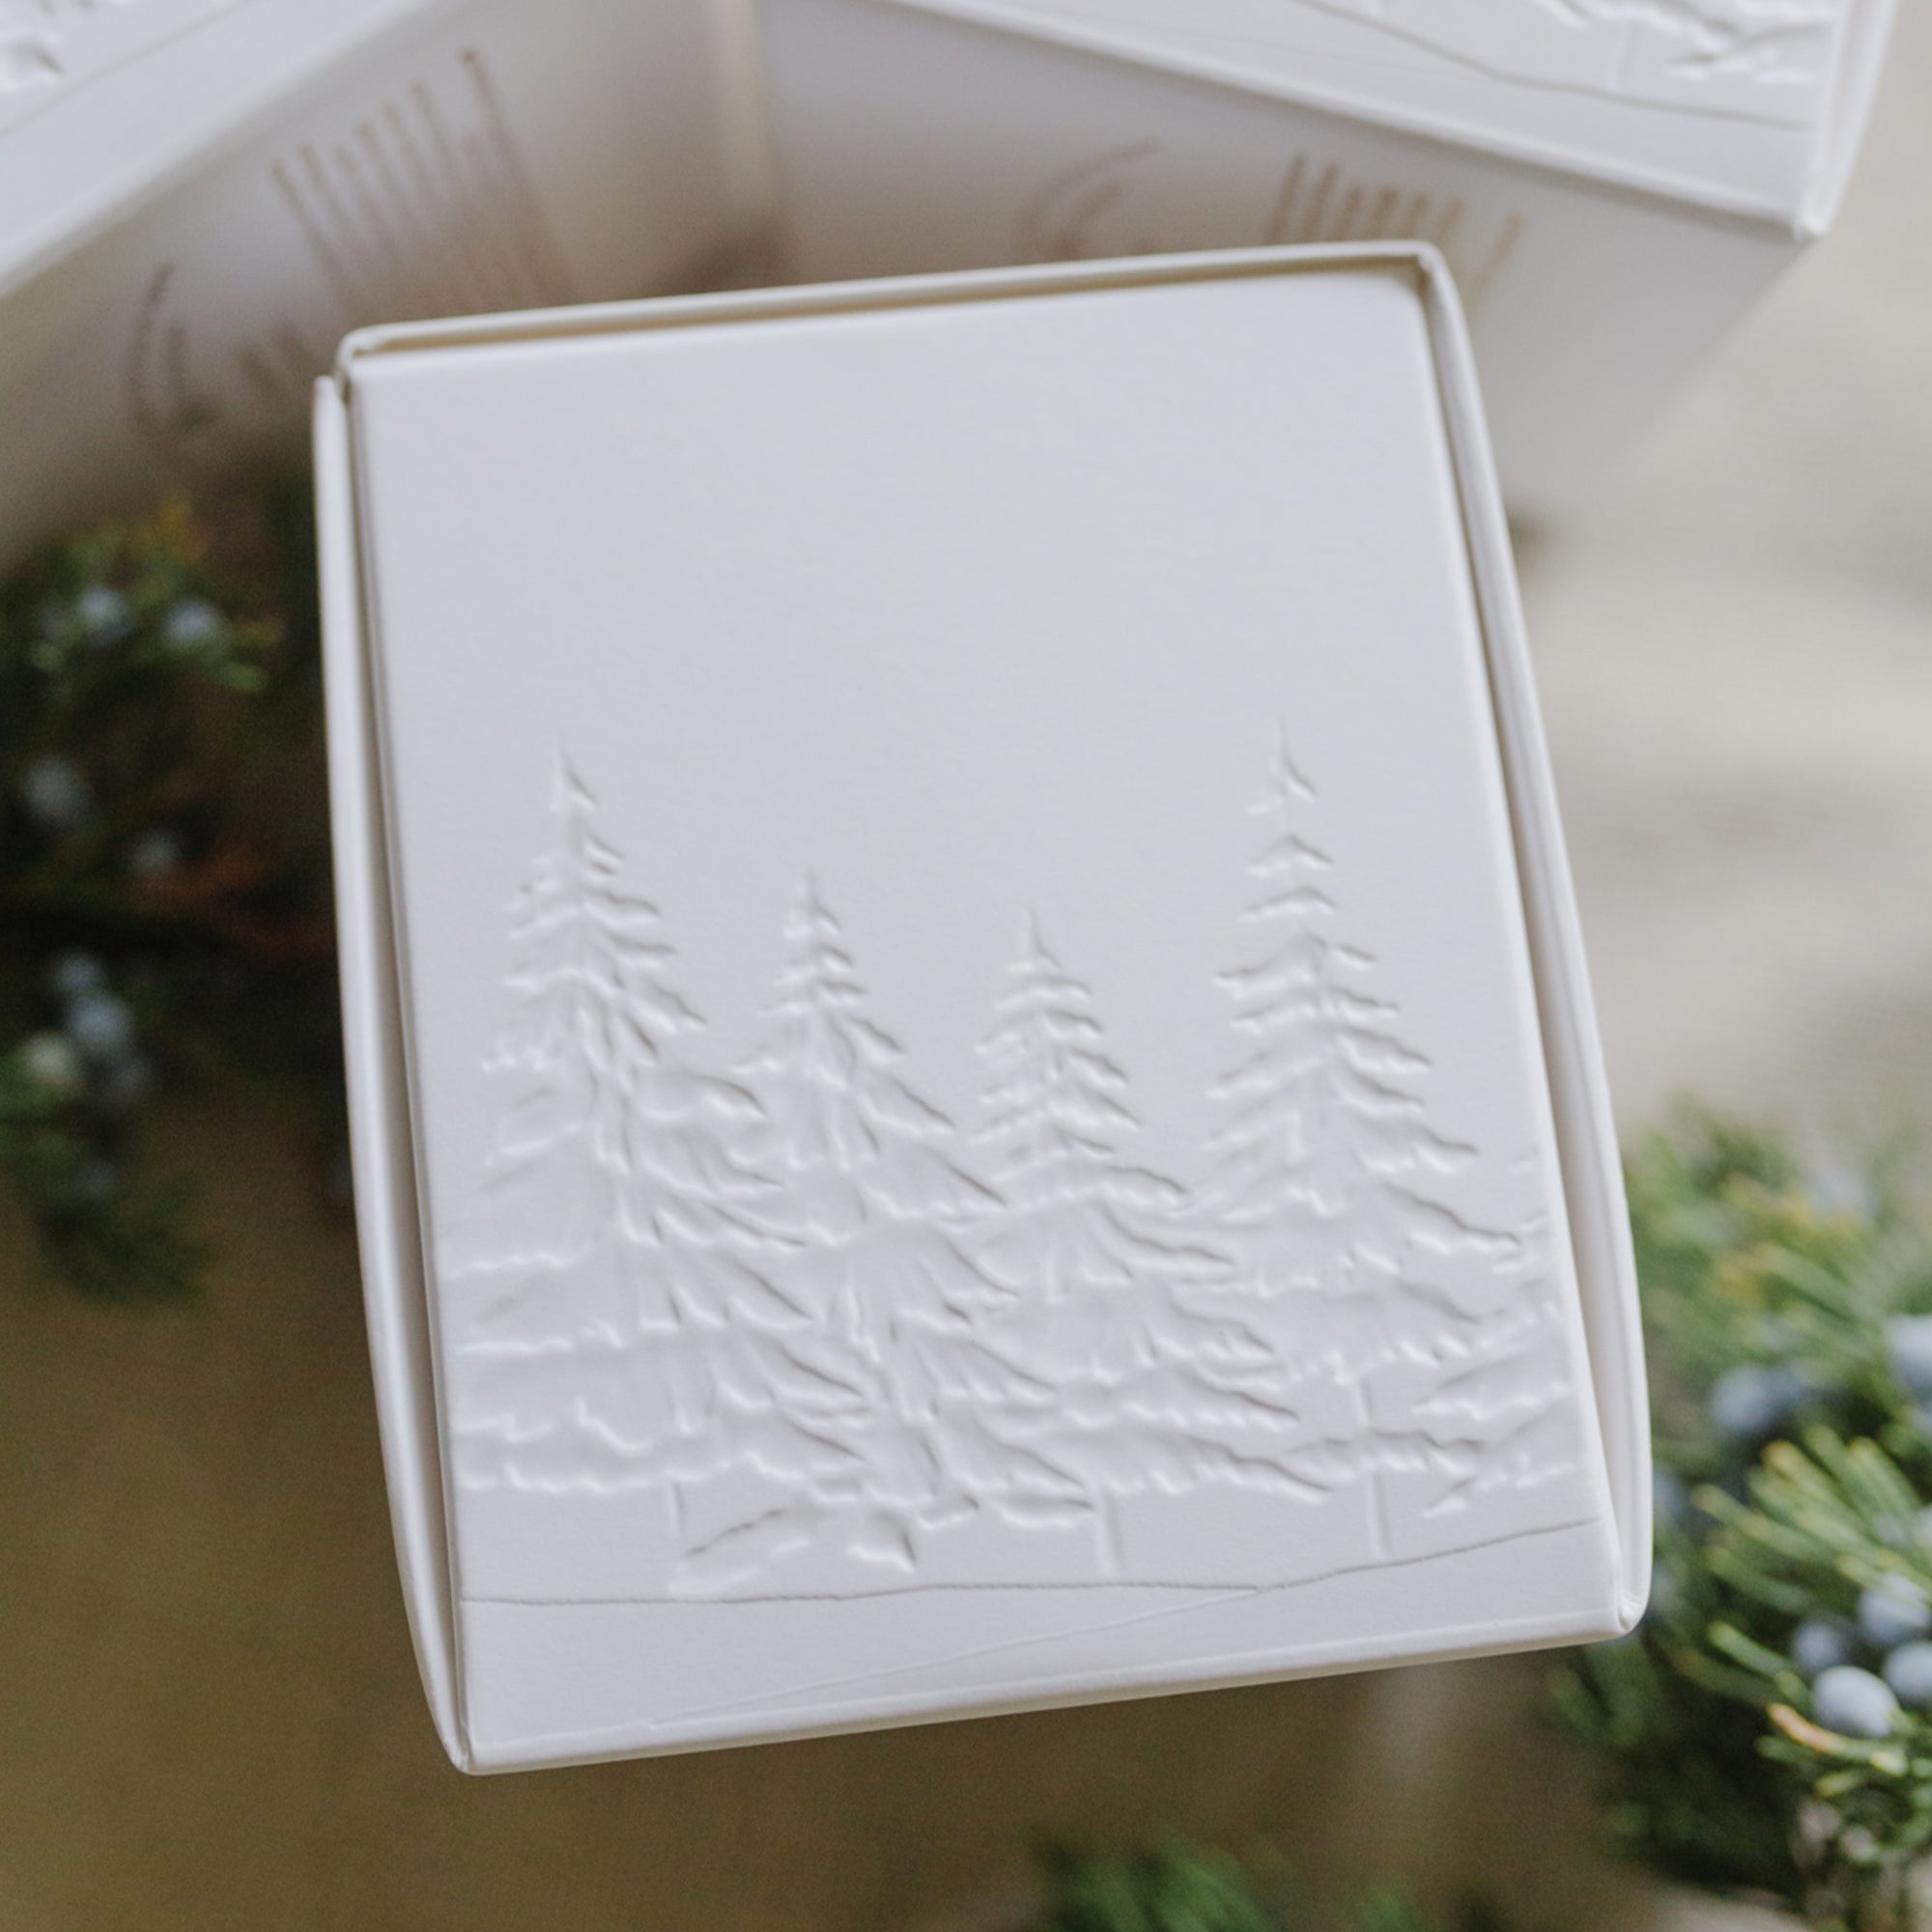 Forest Fir 2-Wick Candle